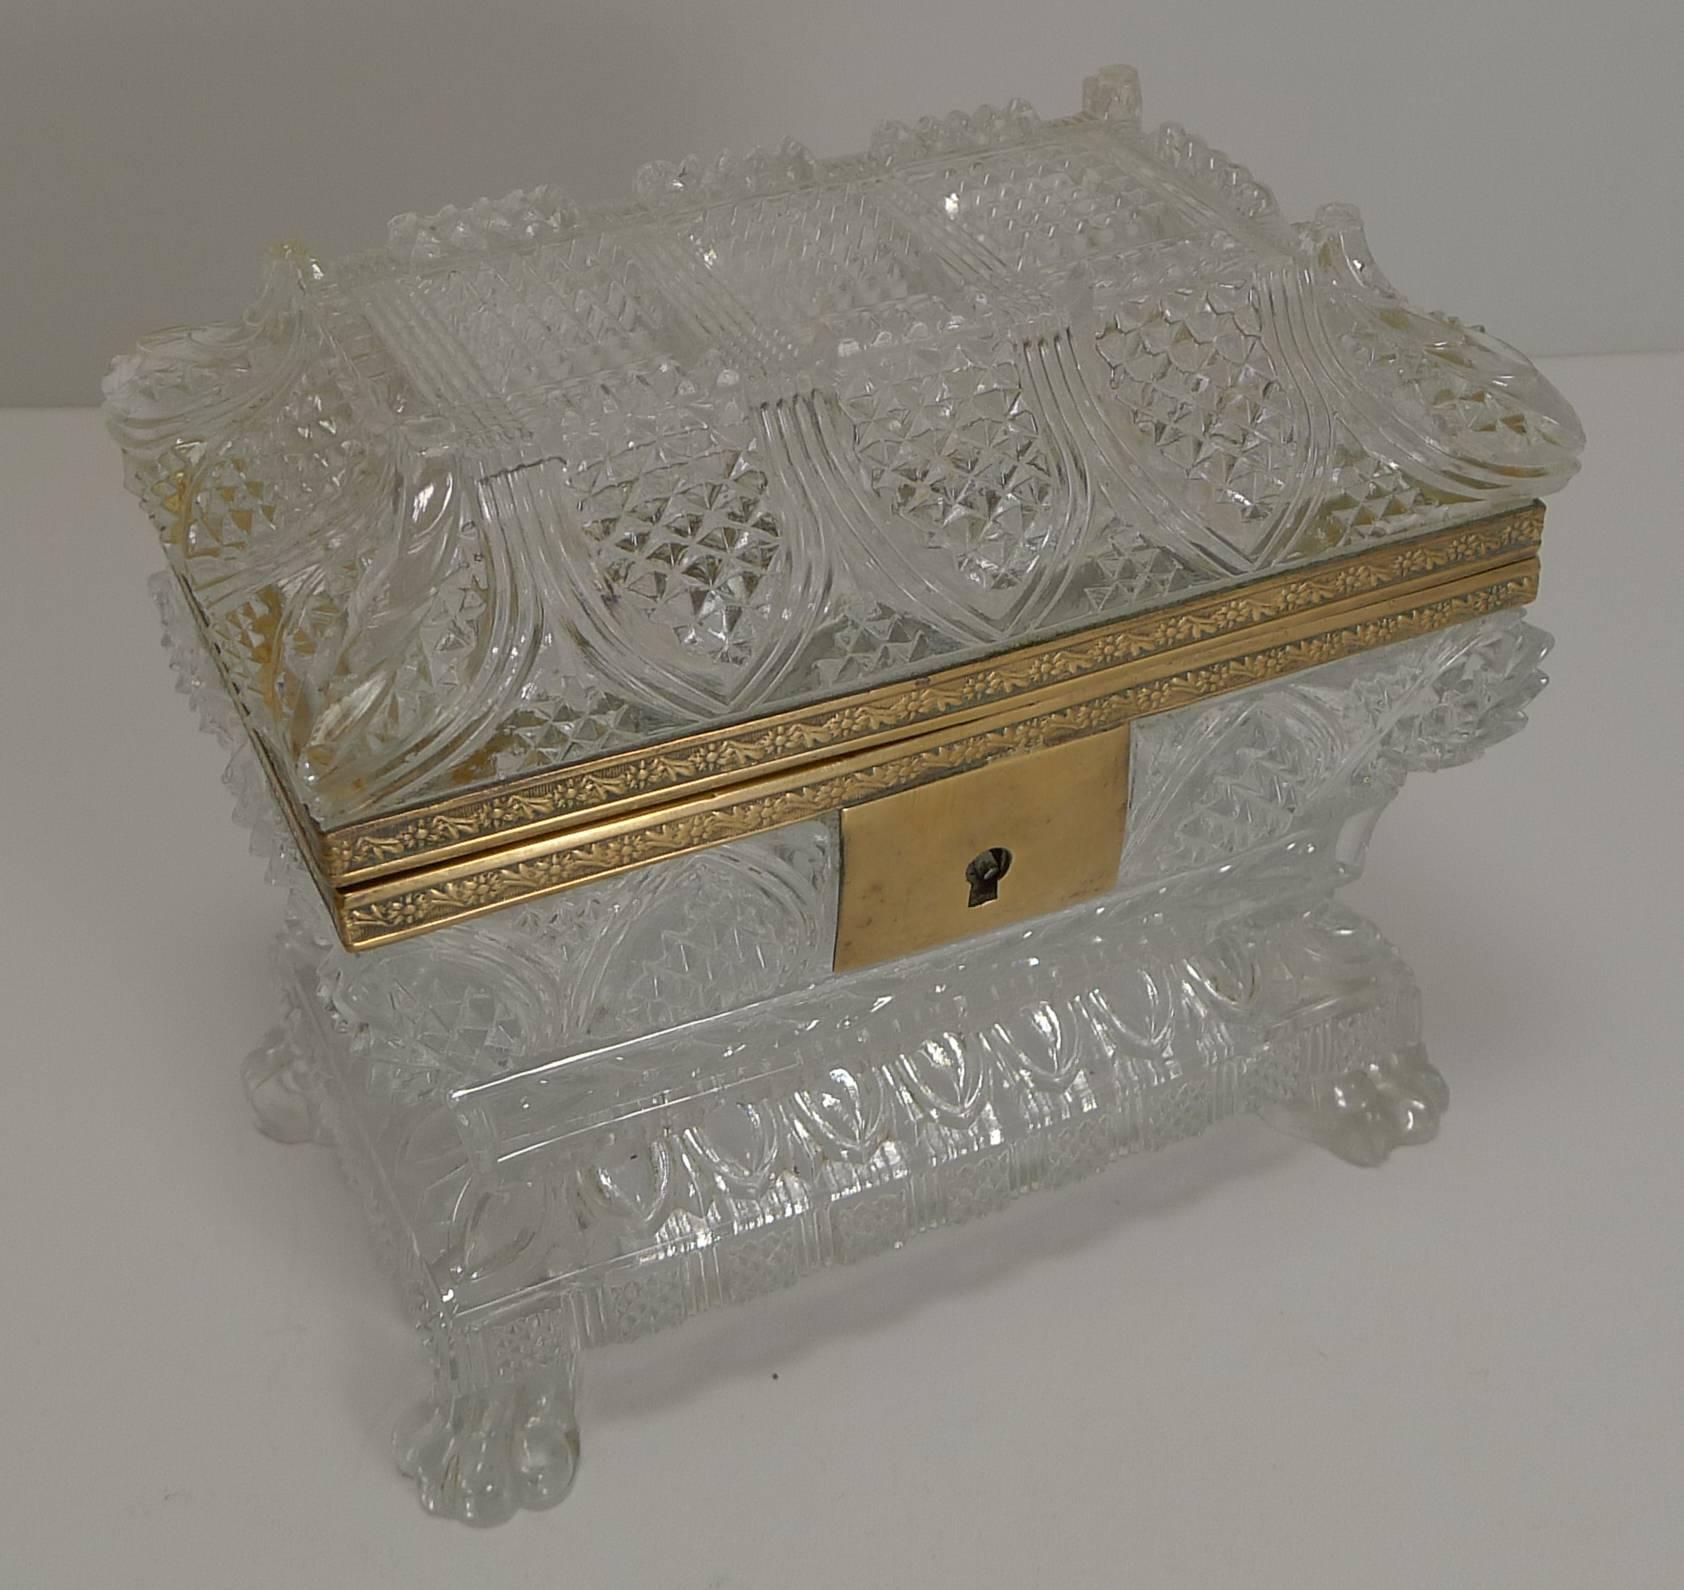 A fabulous shaped Baccarat box with doré bronze mounts. This is a rare example, the shape deeply and intricately cut incorporating four cut lion's paw feet.

Dating to around 1860, this exquisite jewelry box is in excellent undamaged condition. 5